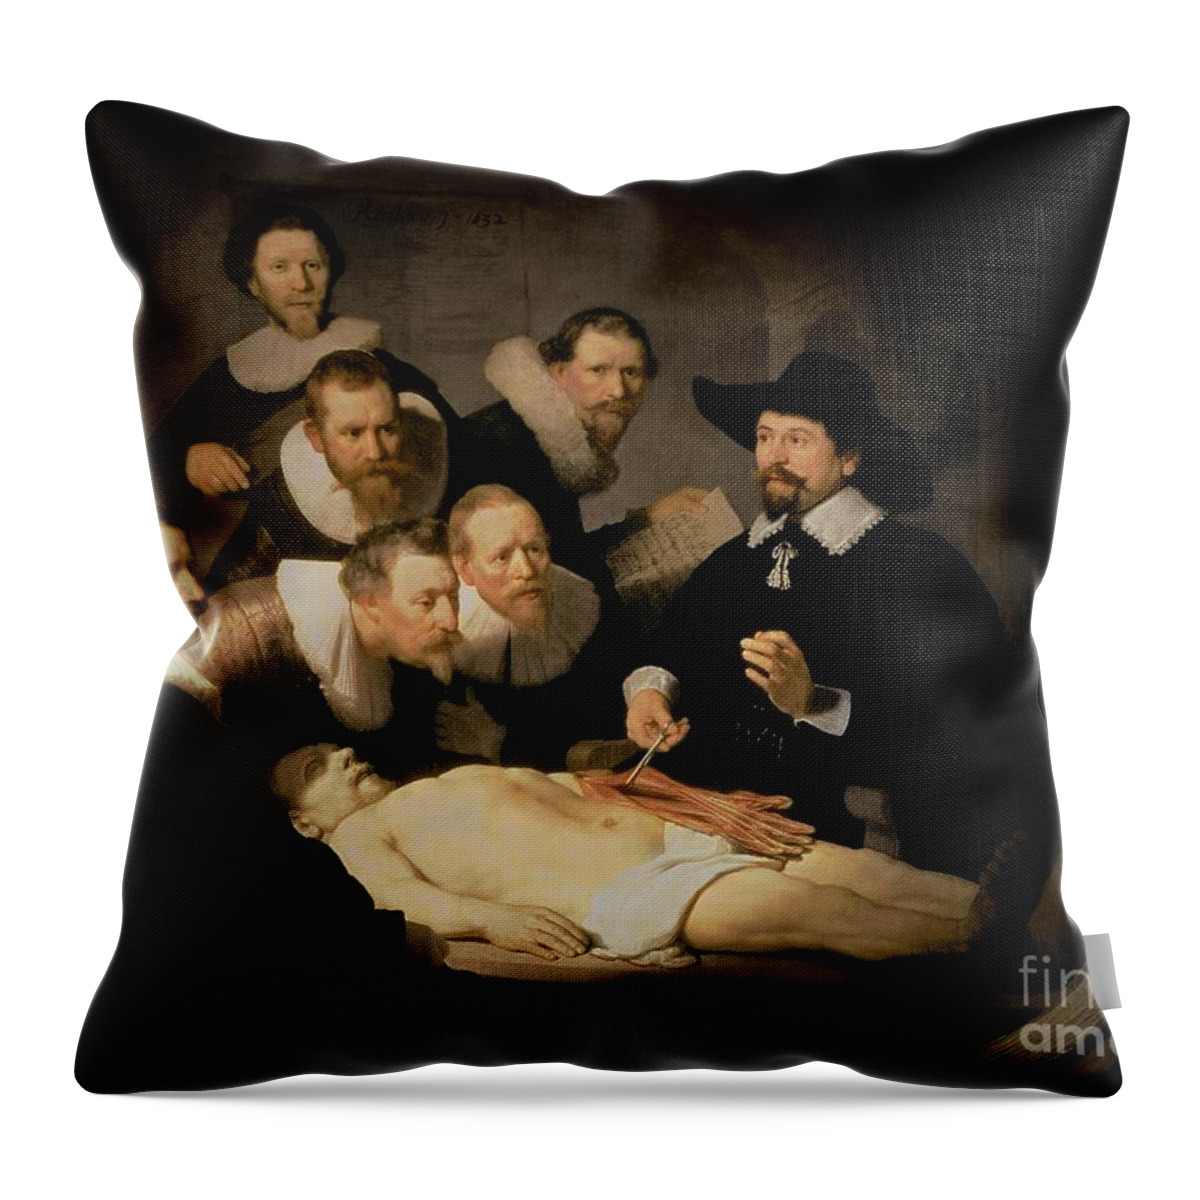 The Throw Pillow featuring the painting The Anatomy Lesson of Doctor Nicolaes Tulp by Rembrandt Harmenszoon van Rijn